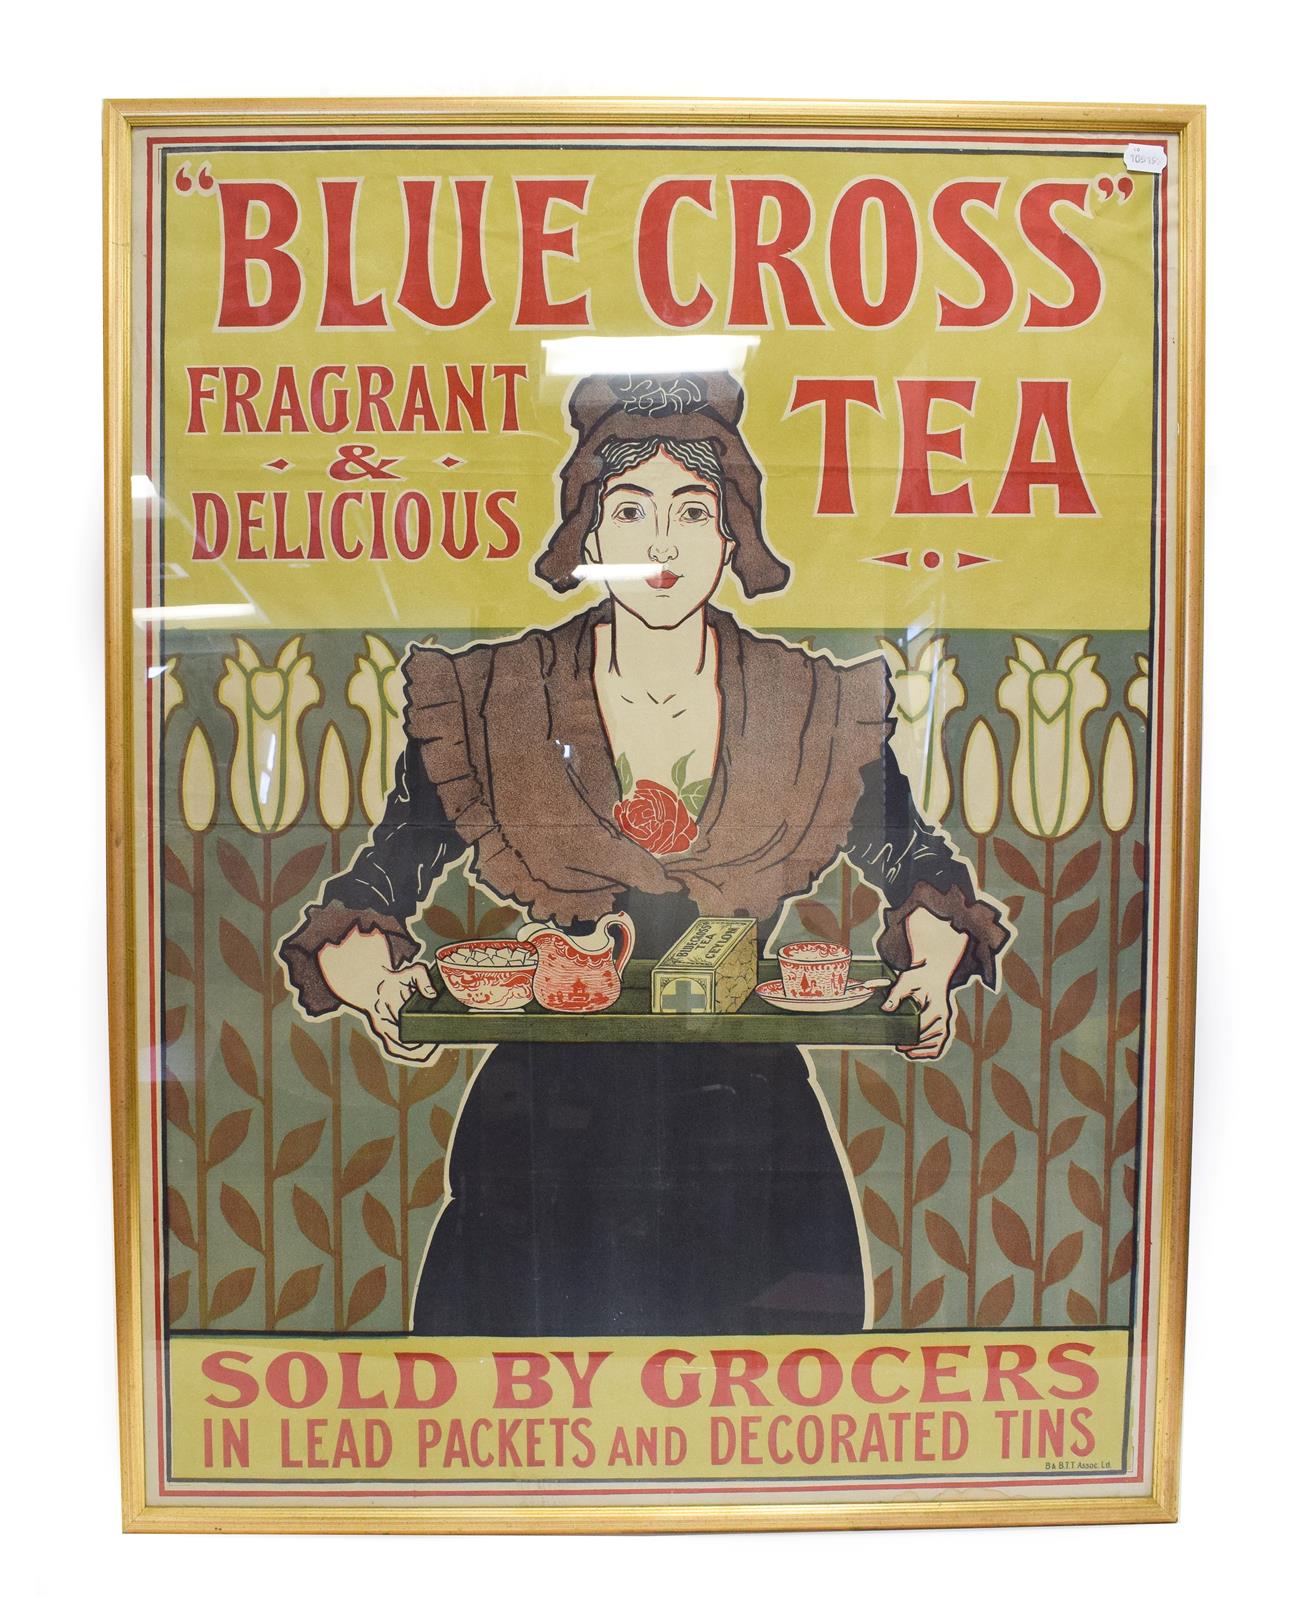 Blue Cross Tea - Fragrant & Delicious Poster depicting a lady carrying a tray of tea and